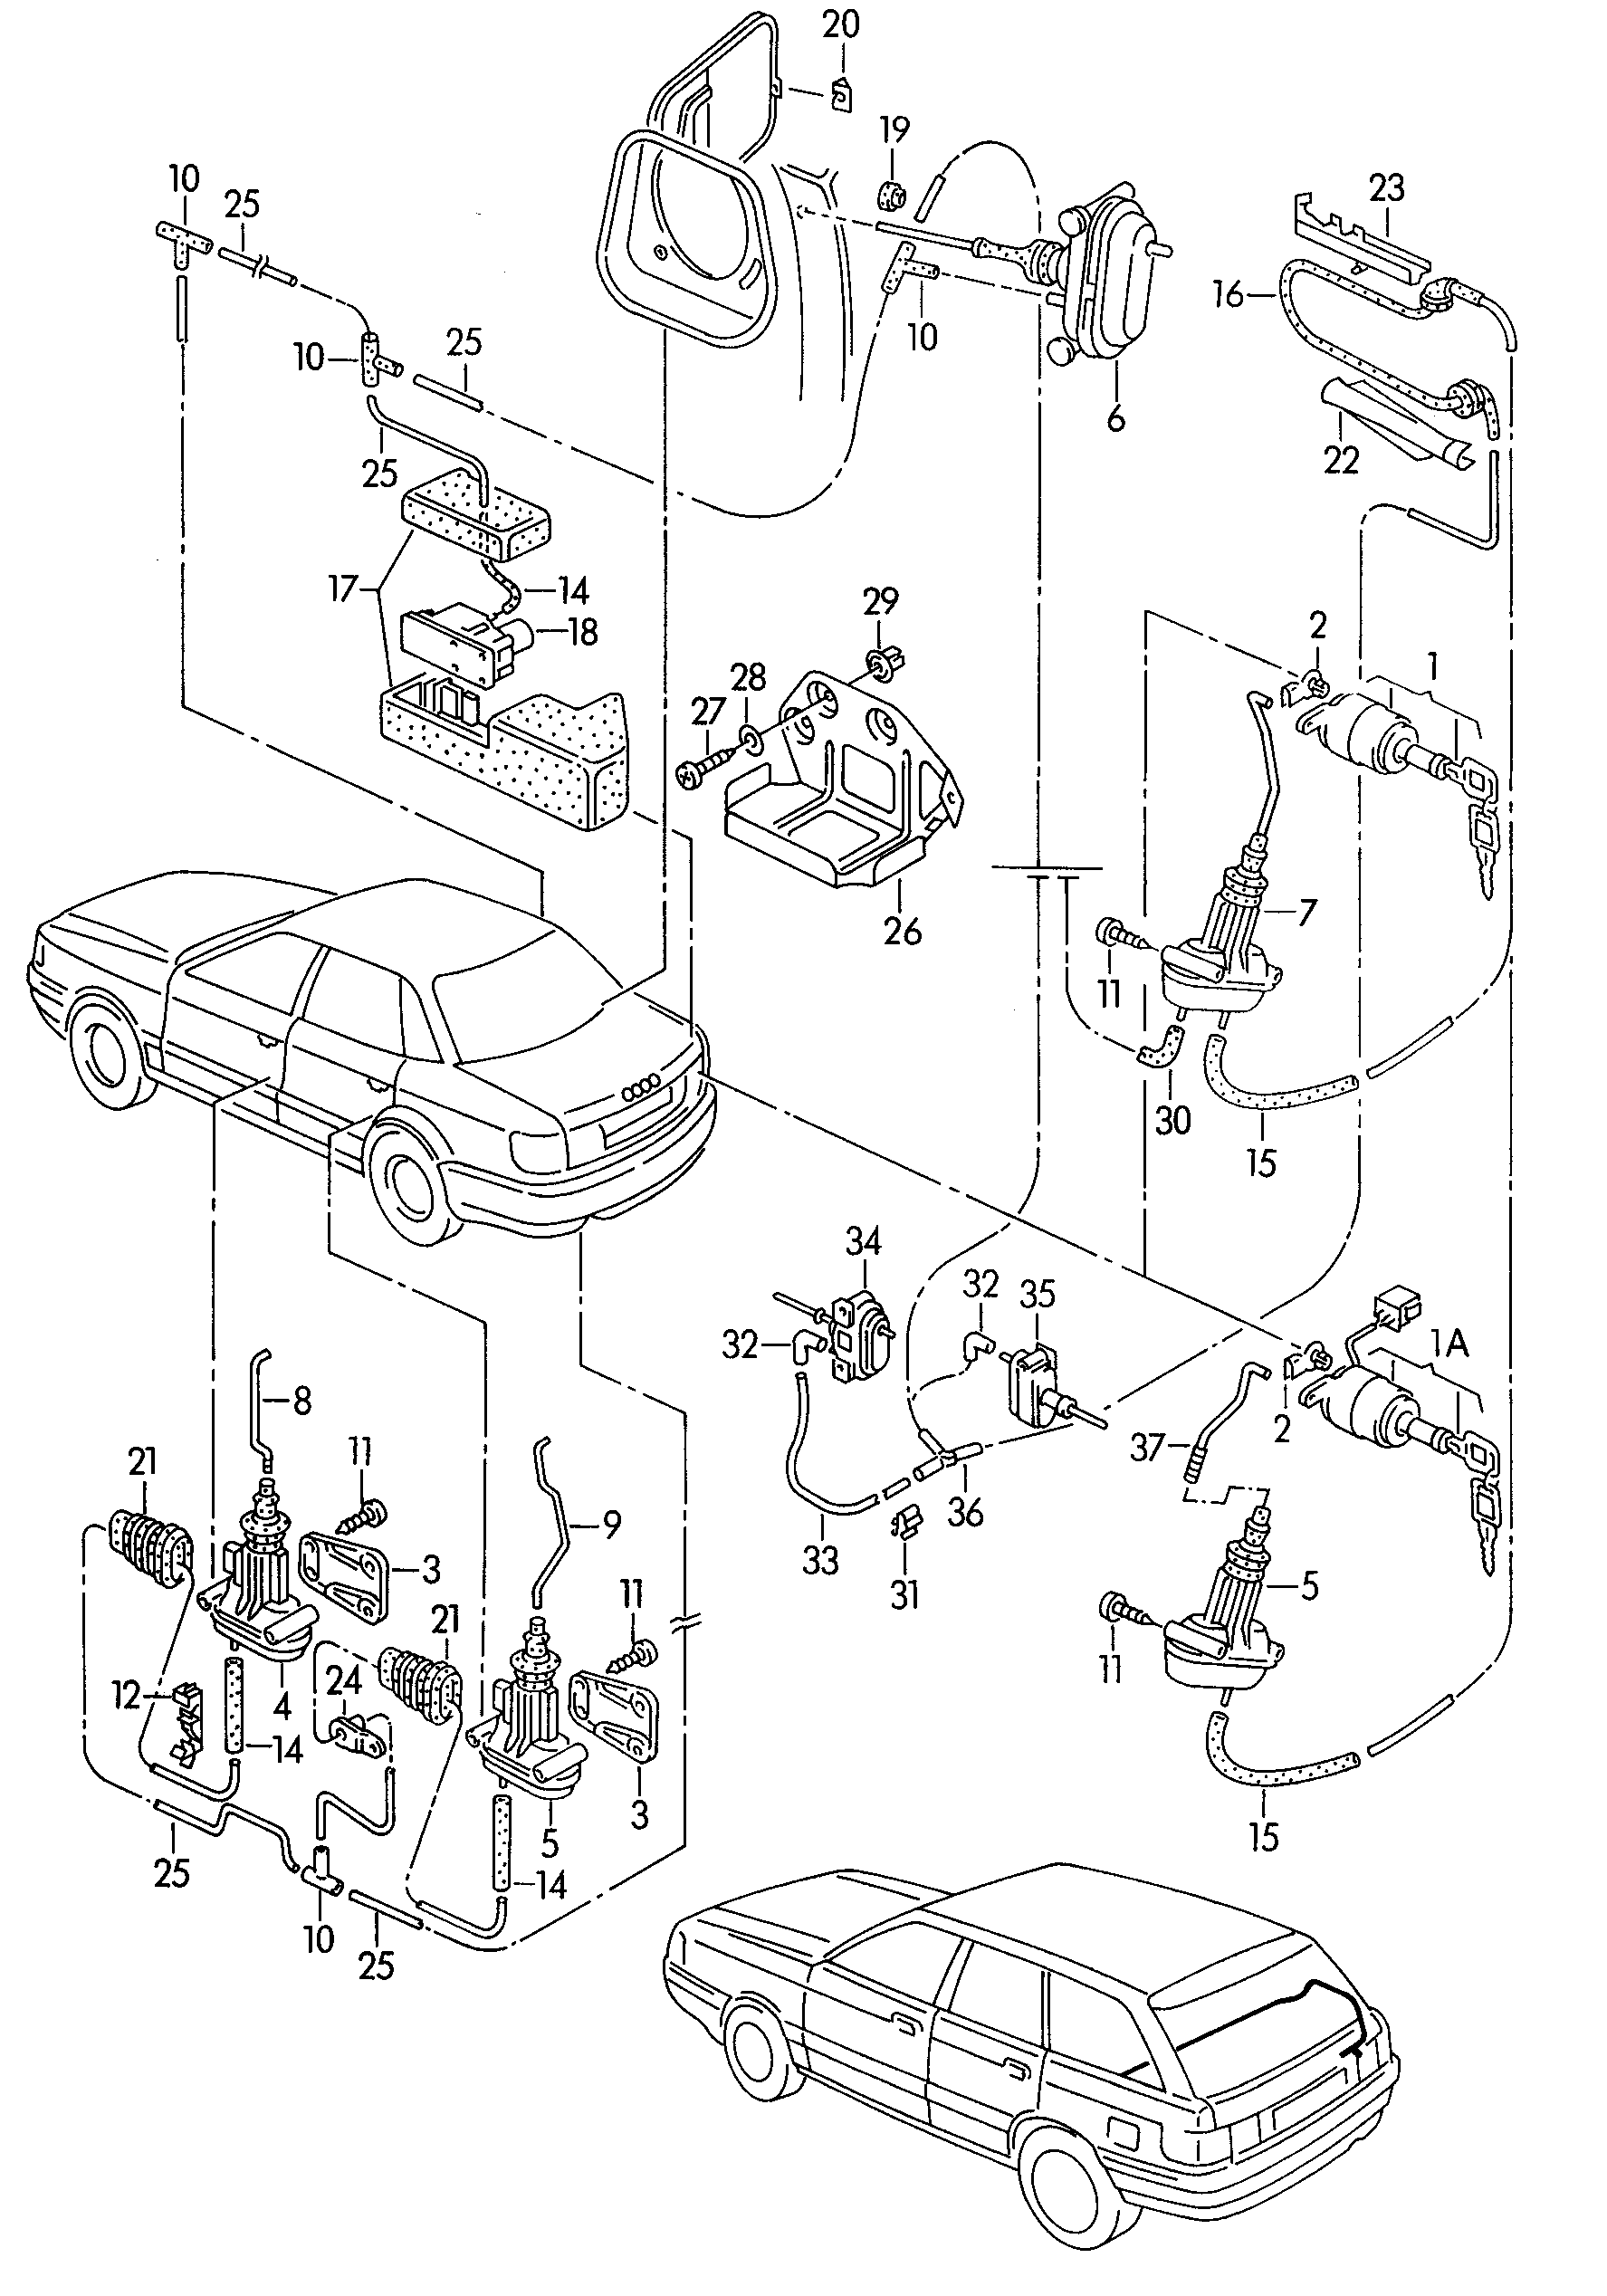 central locking system  - Audi 80/90 - a80